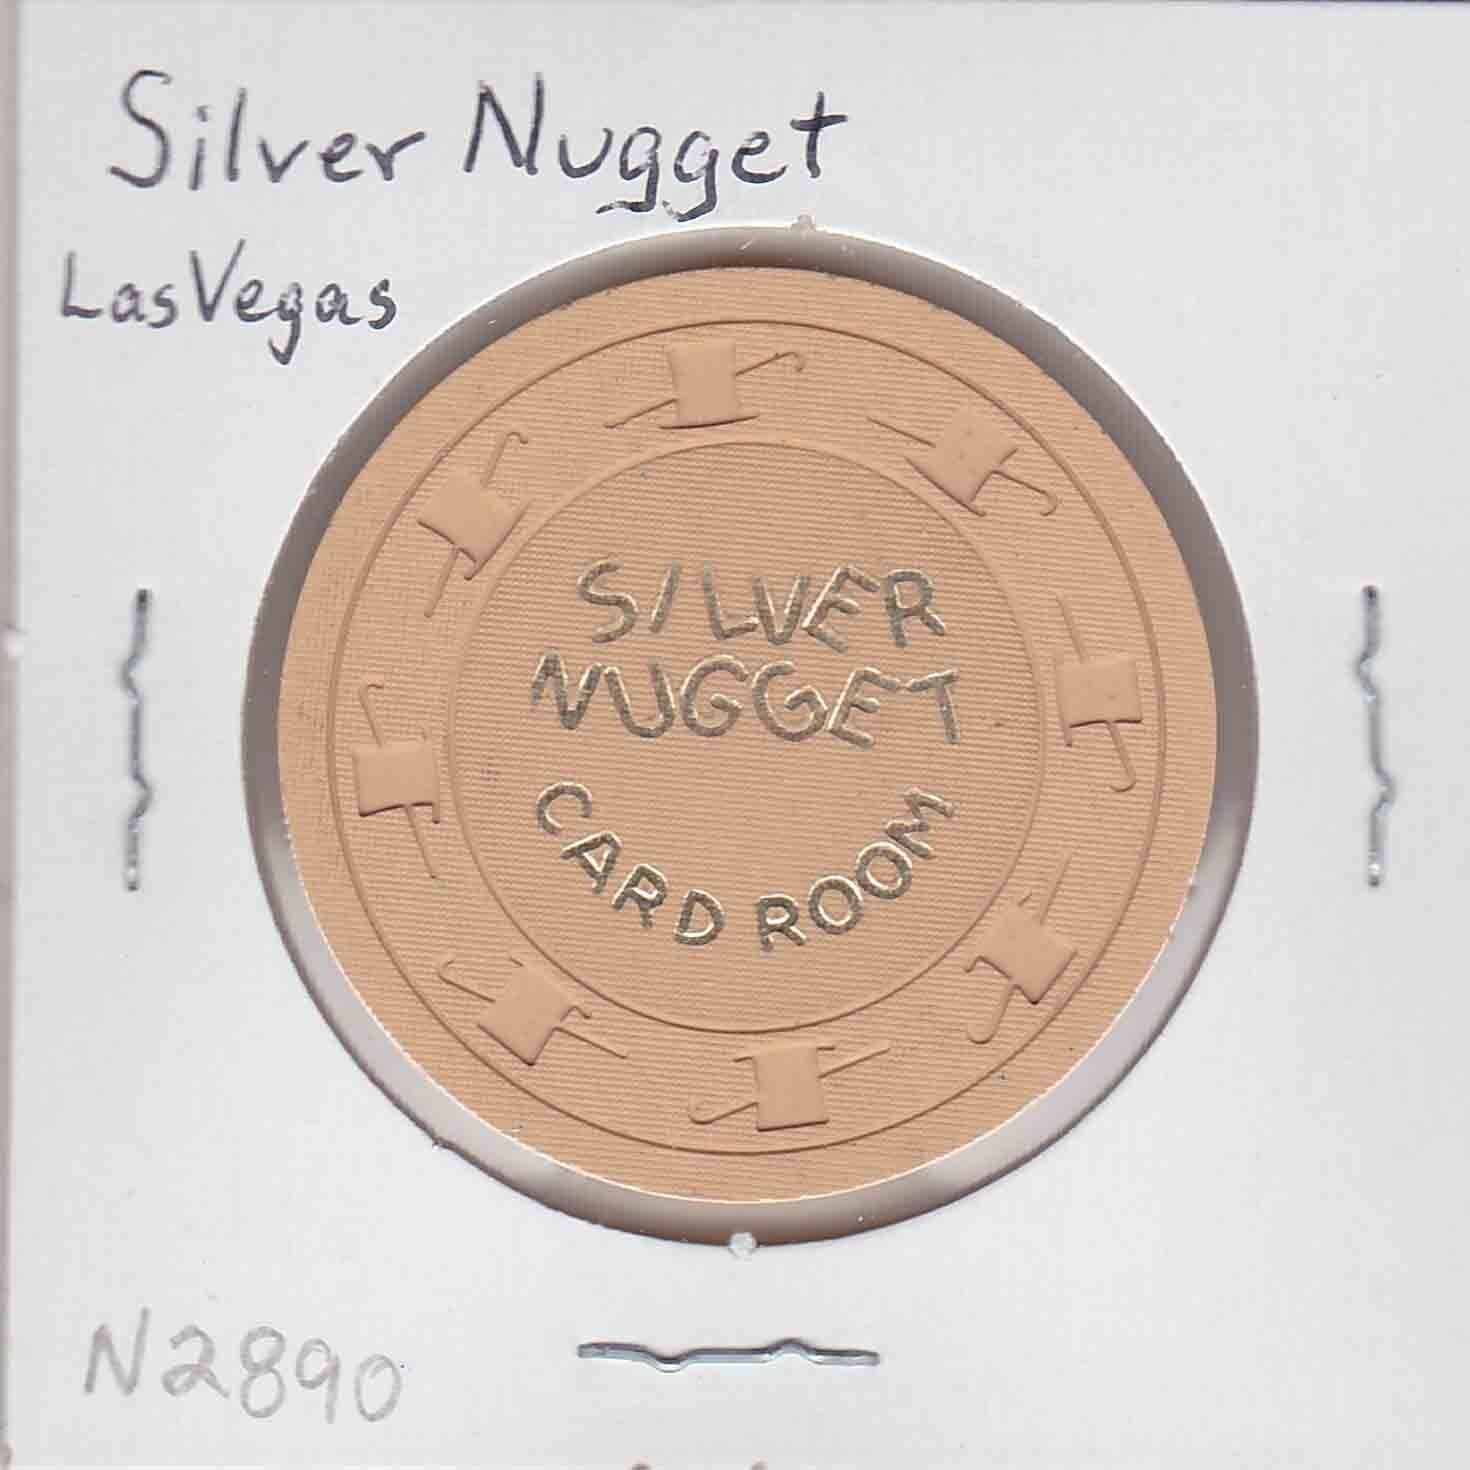 Vintage $1 Card Room chip from Silver Nugget Casino (1960s) Las Vegas